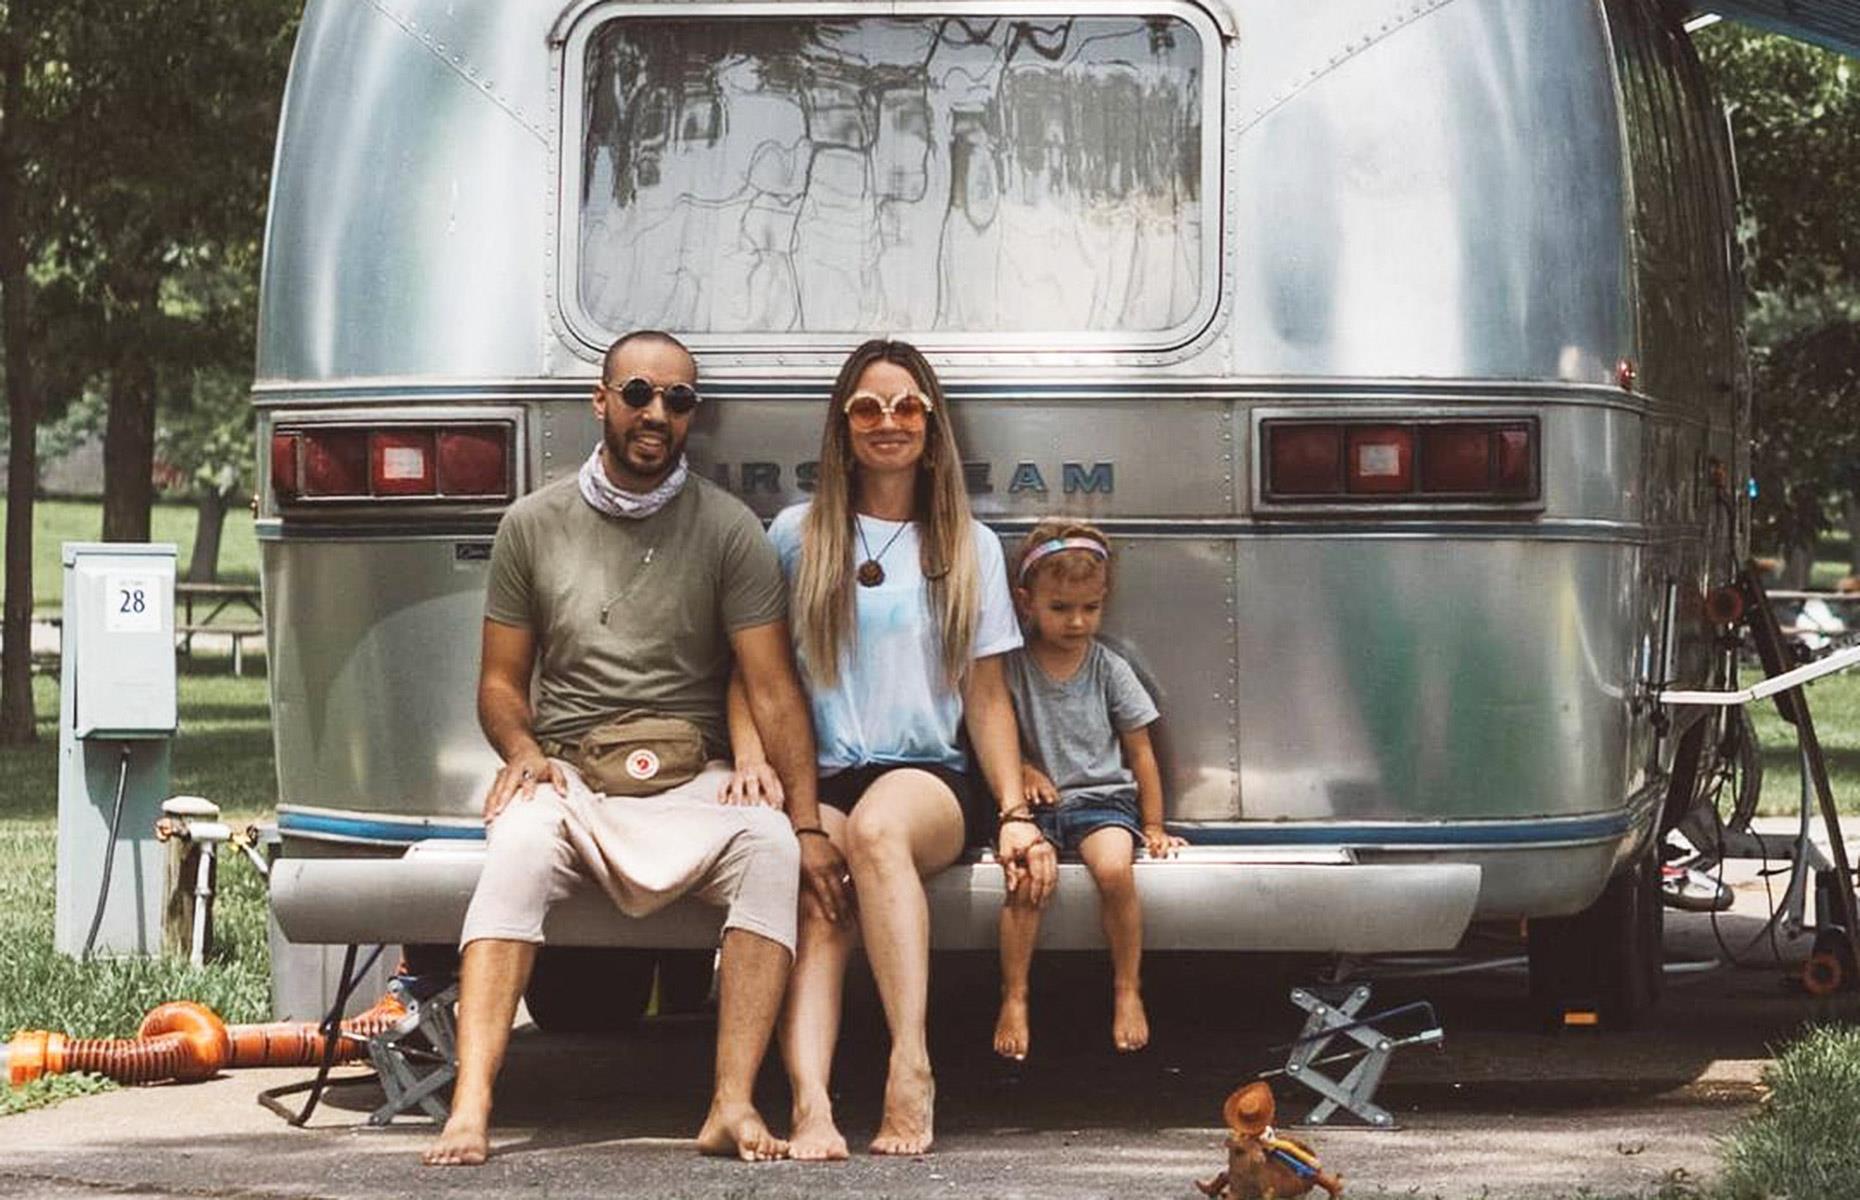 <p>An <a href="https://www.loveproperty.com/gallerylist/84986/this-couple-gave-their-tiny-home-an-extreme-makeover">adventurous couple</a> purchased this 1976 Airstream Sovereign for just $10,000 (£8k) and spent a full year lovingly renovating it, creating their own dream home on wheels.</p>  <p>At only 200 feet in length and packed full of dated 70s furniture and bulky plastic cabinetry, <a href="https://hopscotchtheglobe.com/">the couple</a> had to get creative with their renovations to make the space work for them.</p>